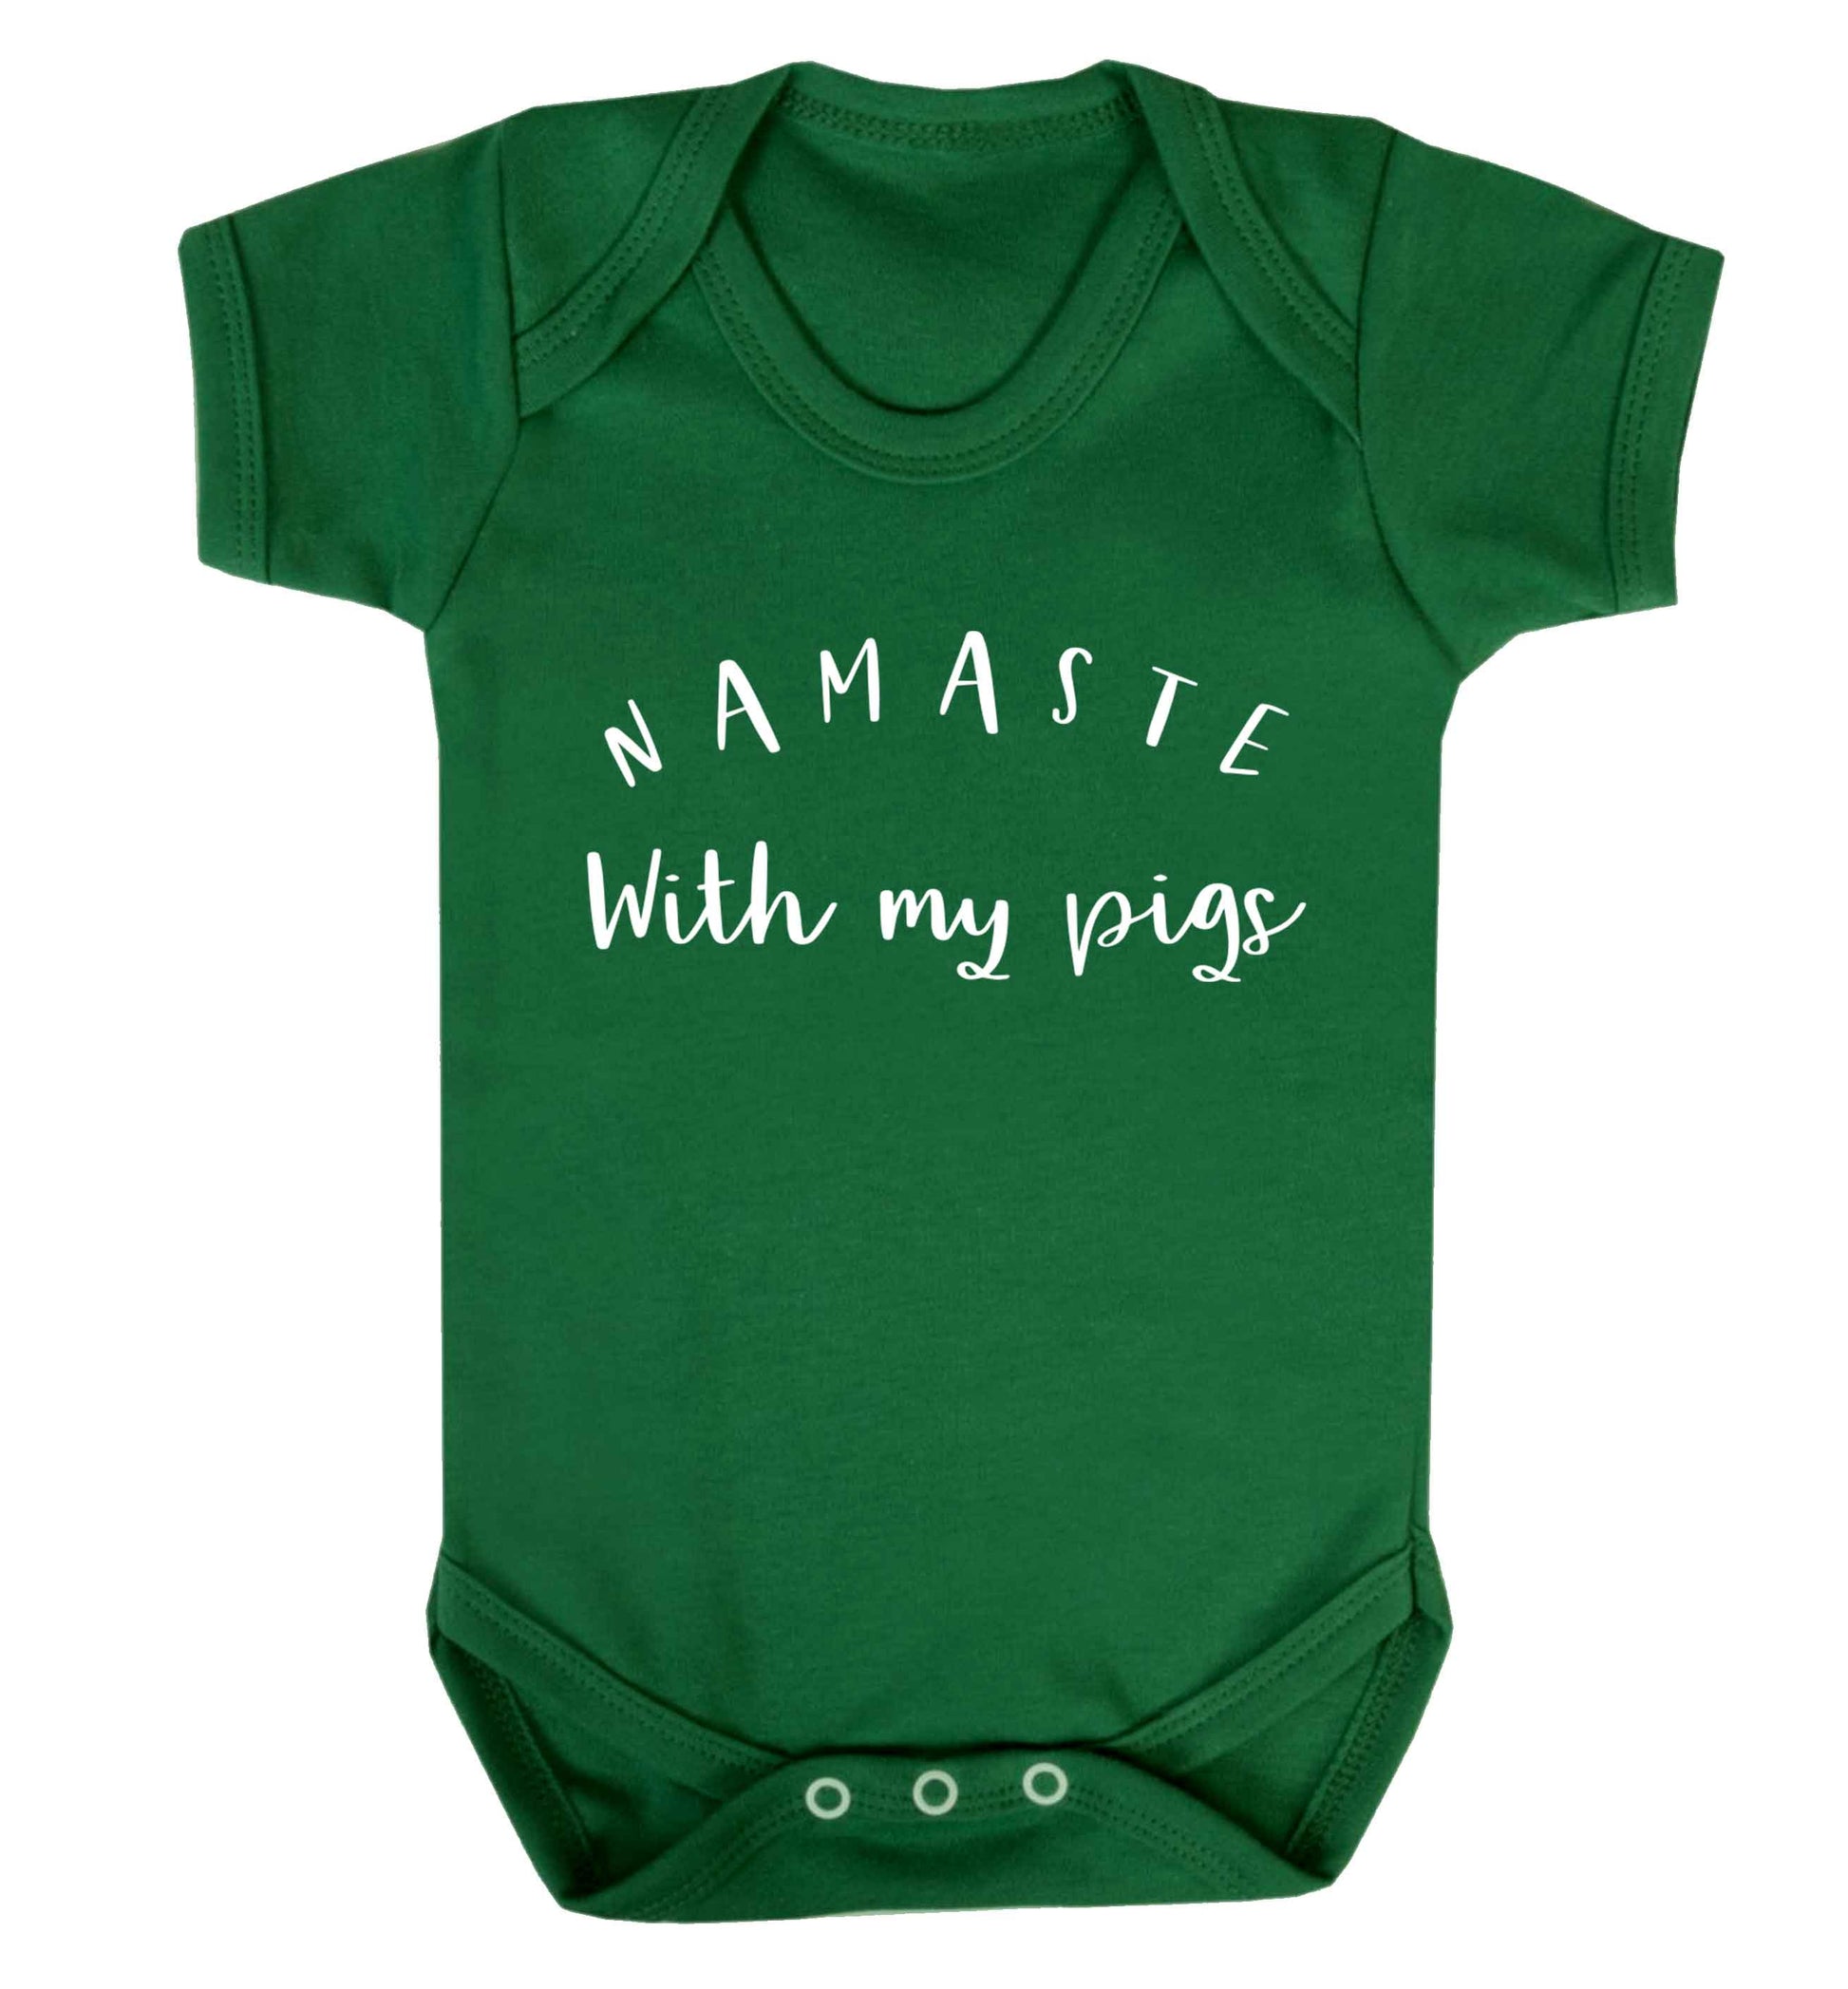 Namaste with my pigs Baby Vest green 18-24 months